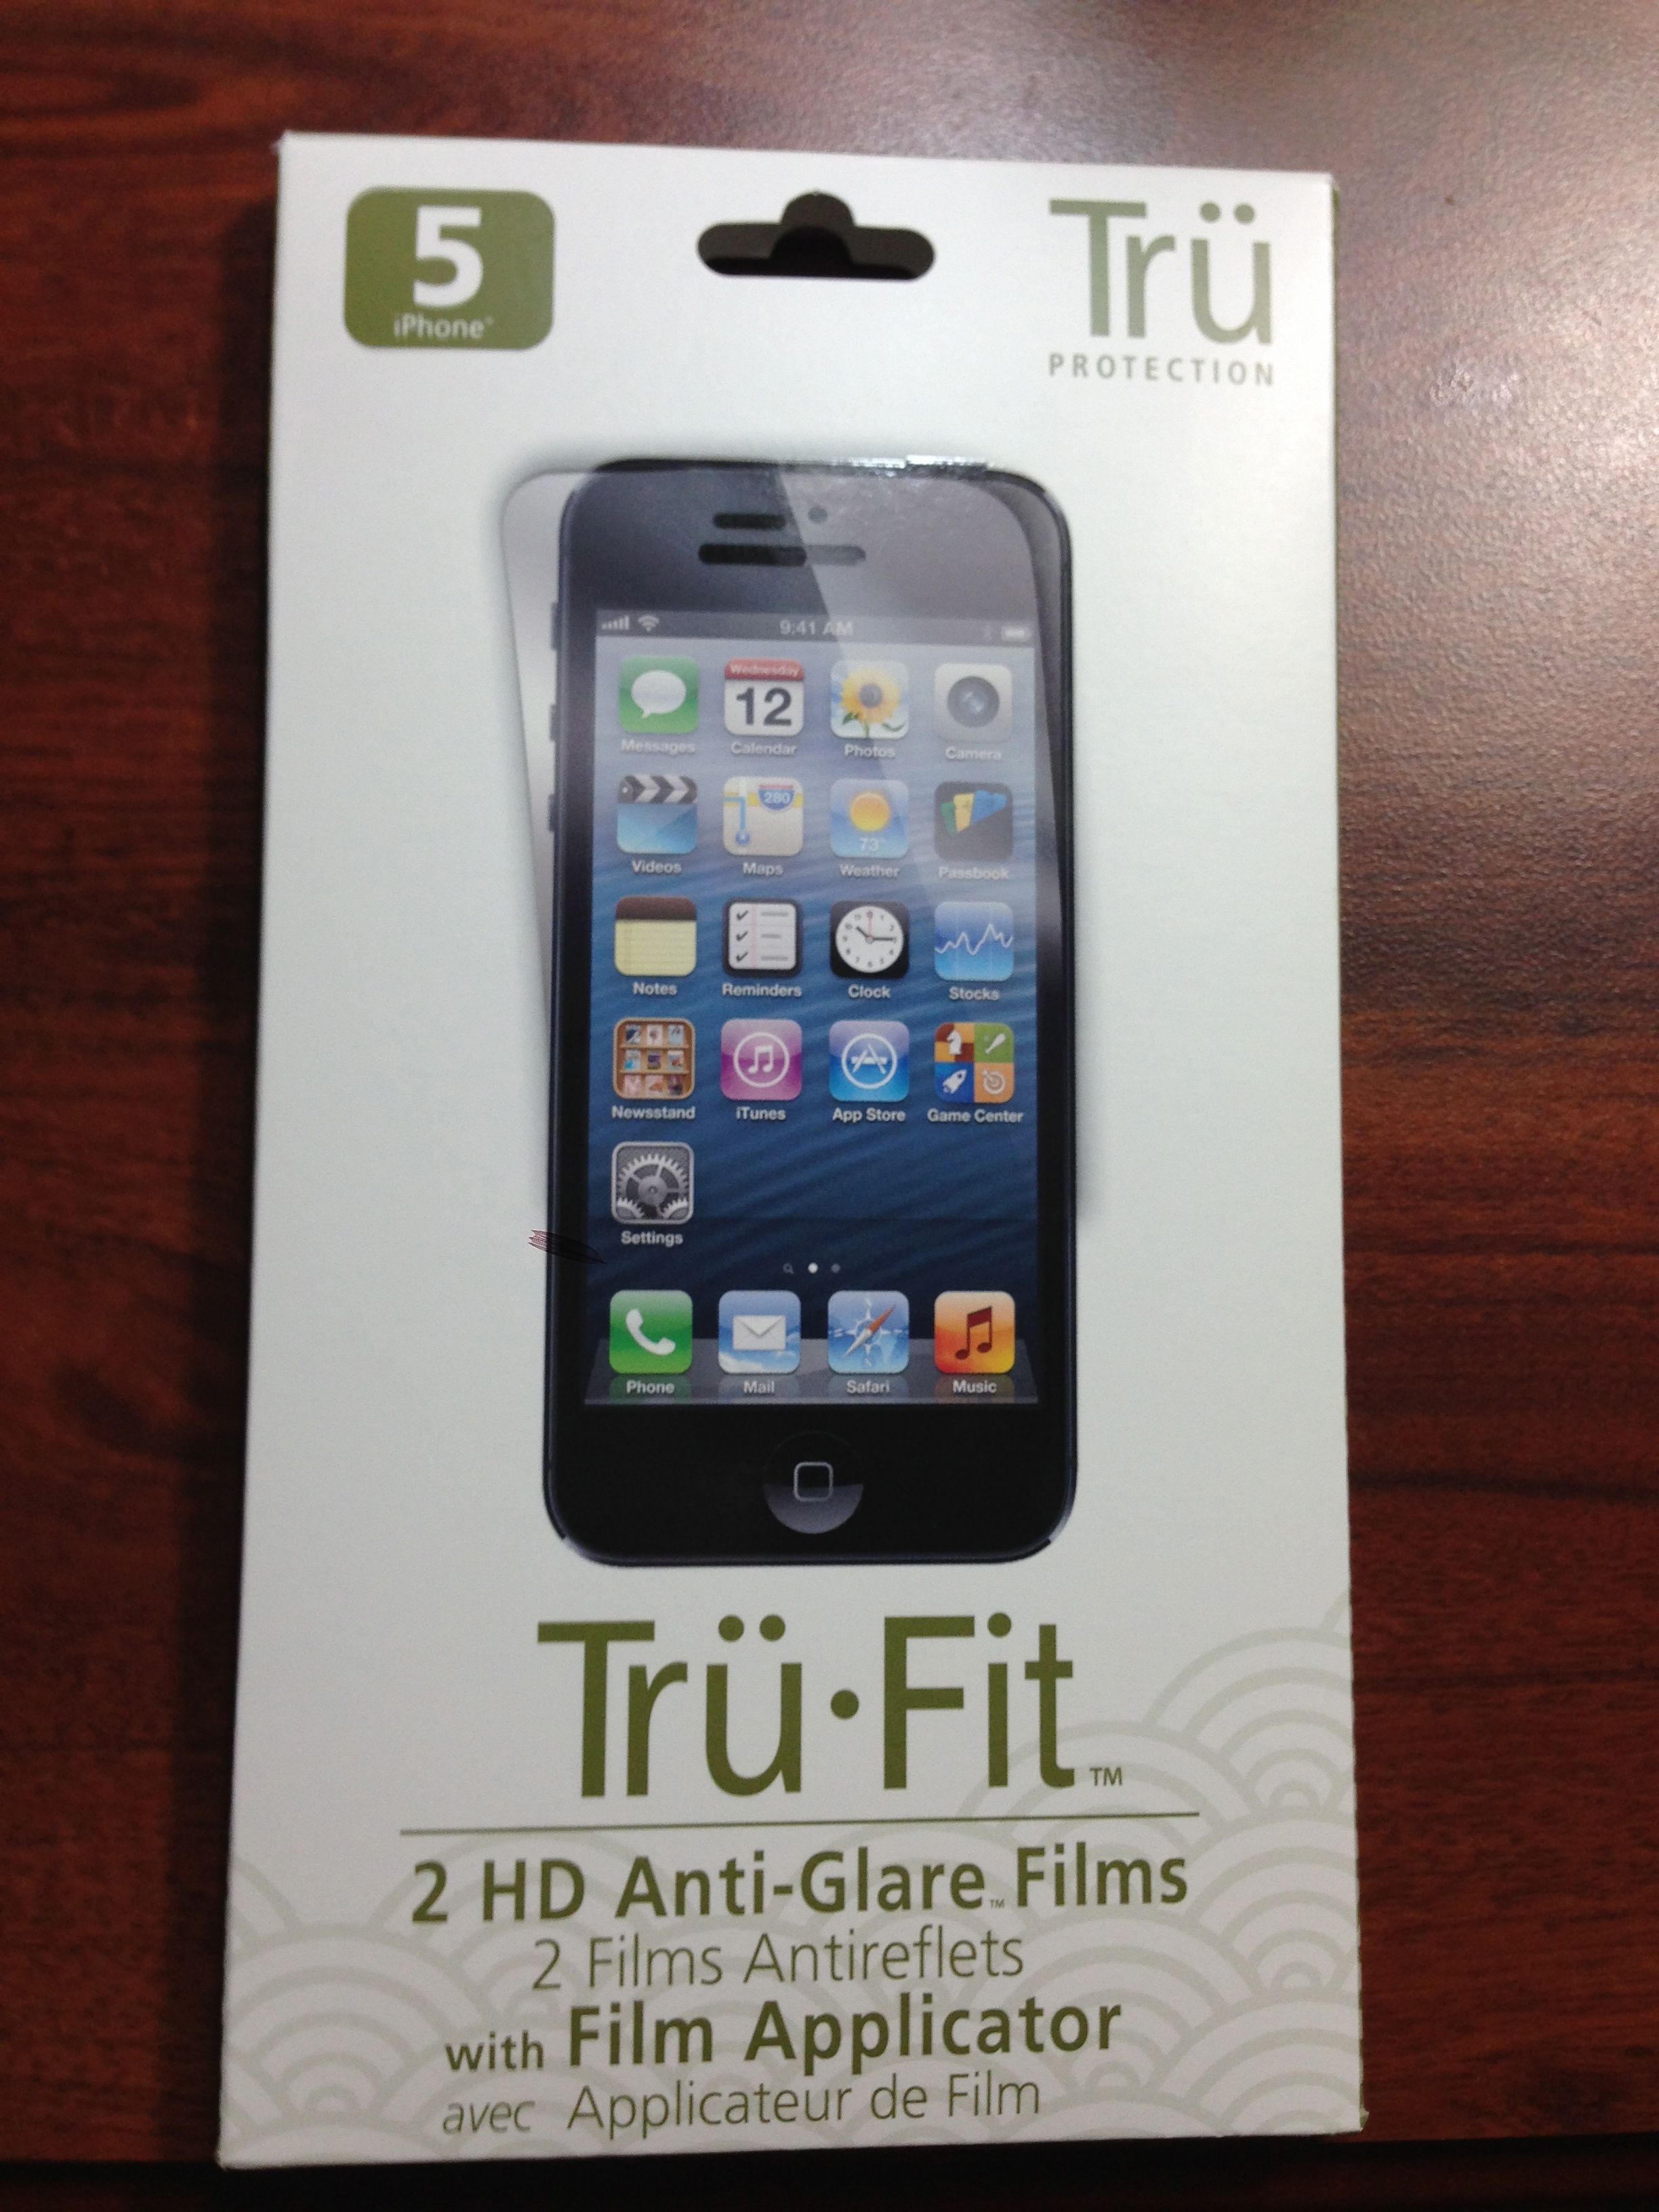 TRÜ-FIT HD Anti-Glare Screen Protector Review - Stress Dissipation at Its Best